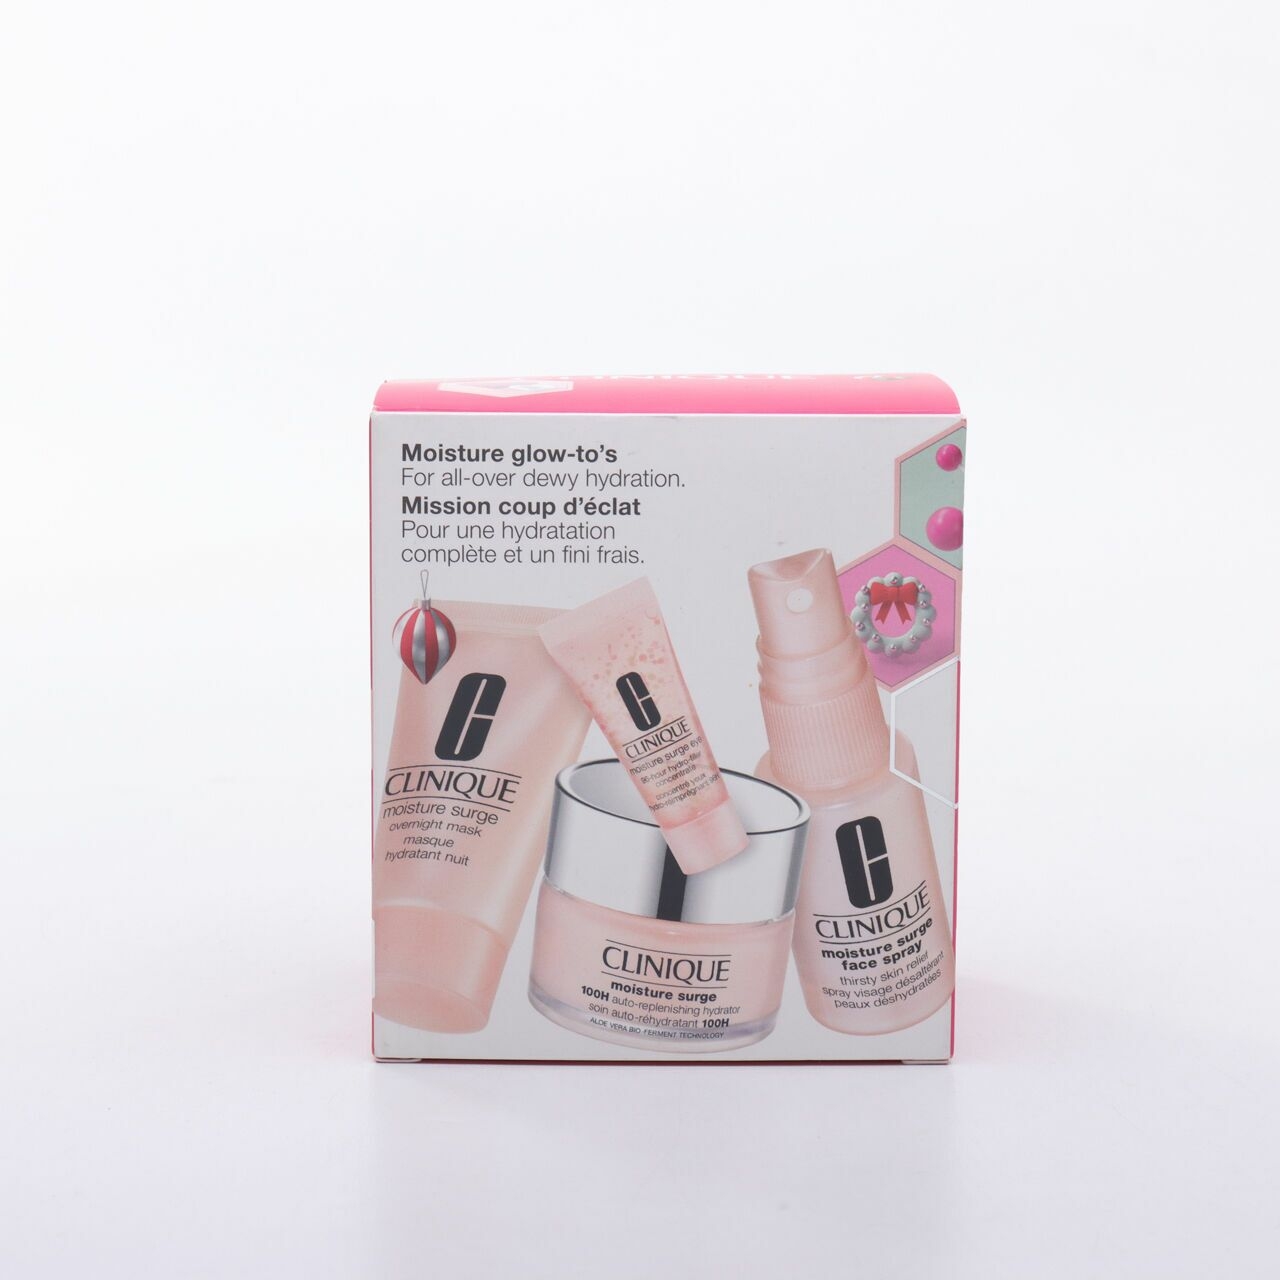 Private Collection Moisture surge value set Moisture glow-to's: for all-over hydration Faces